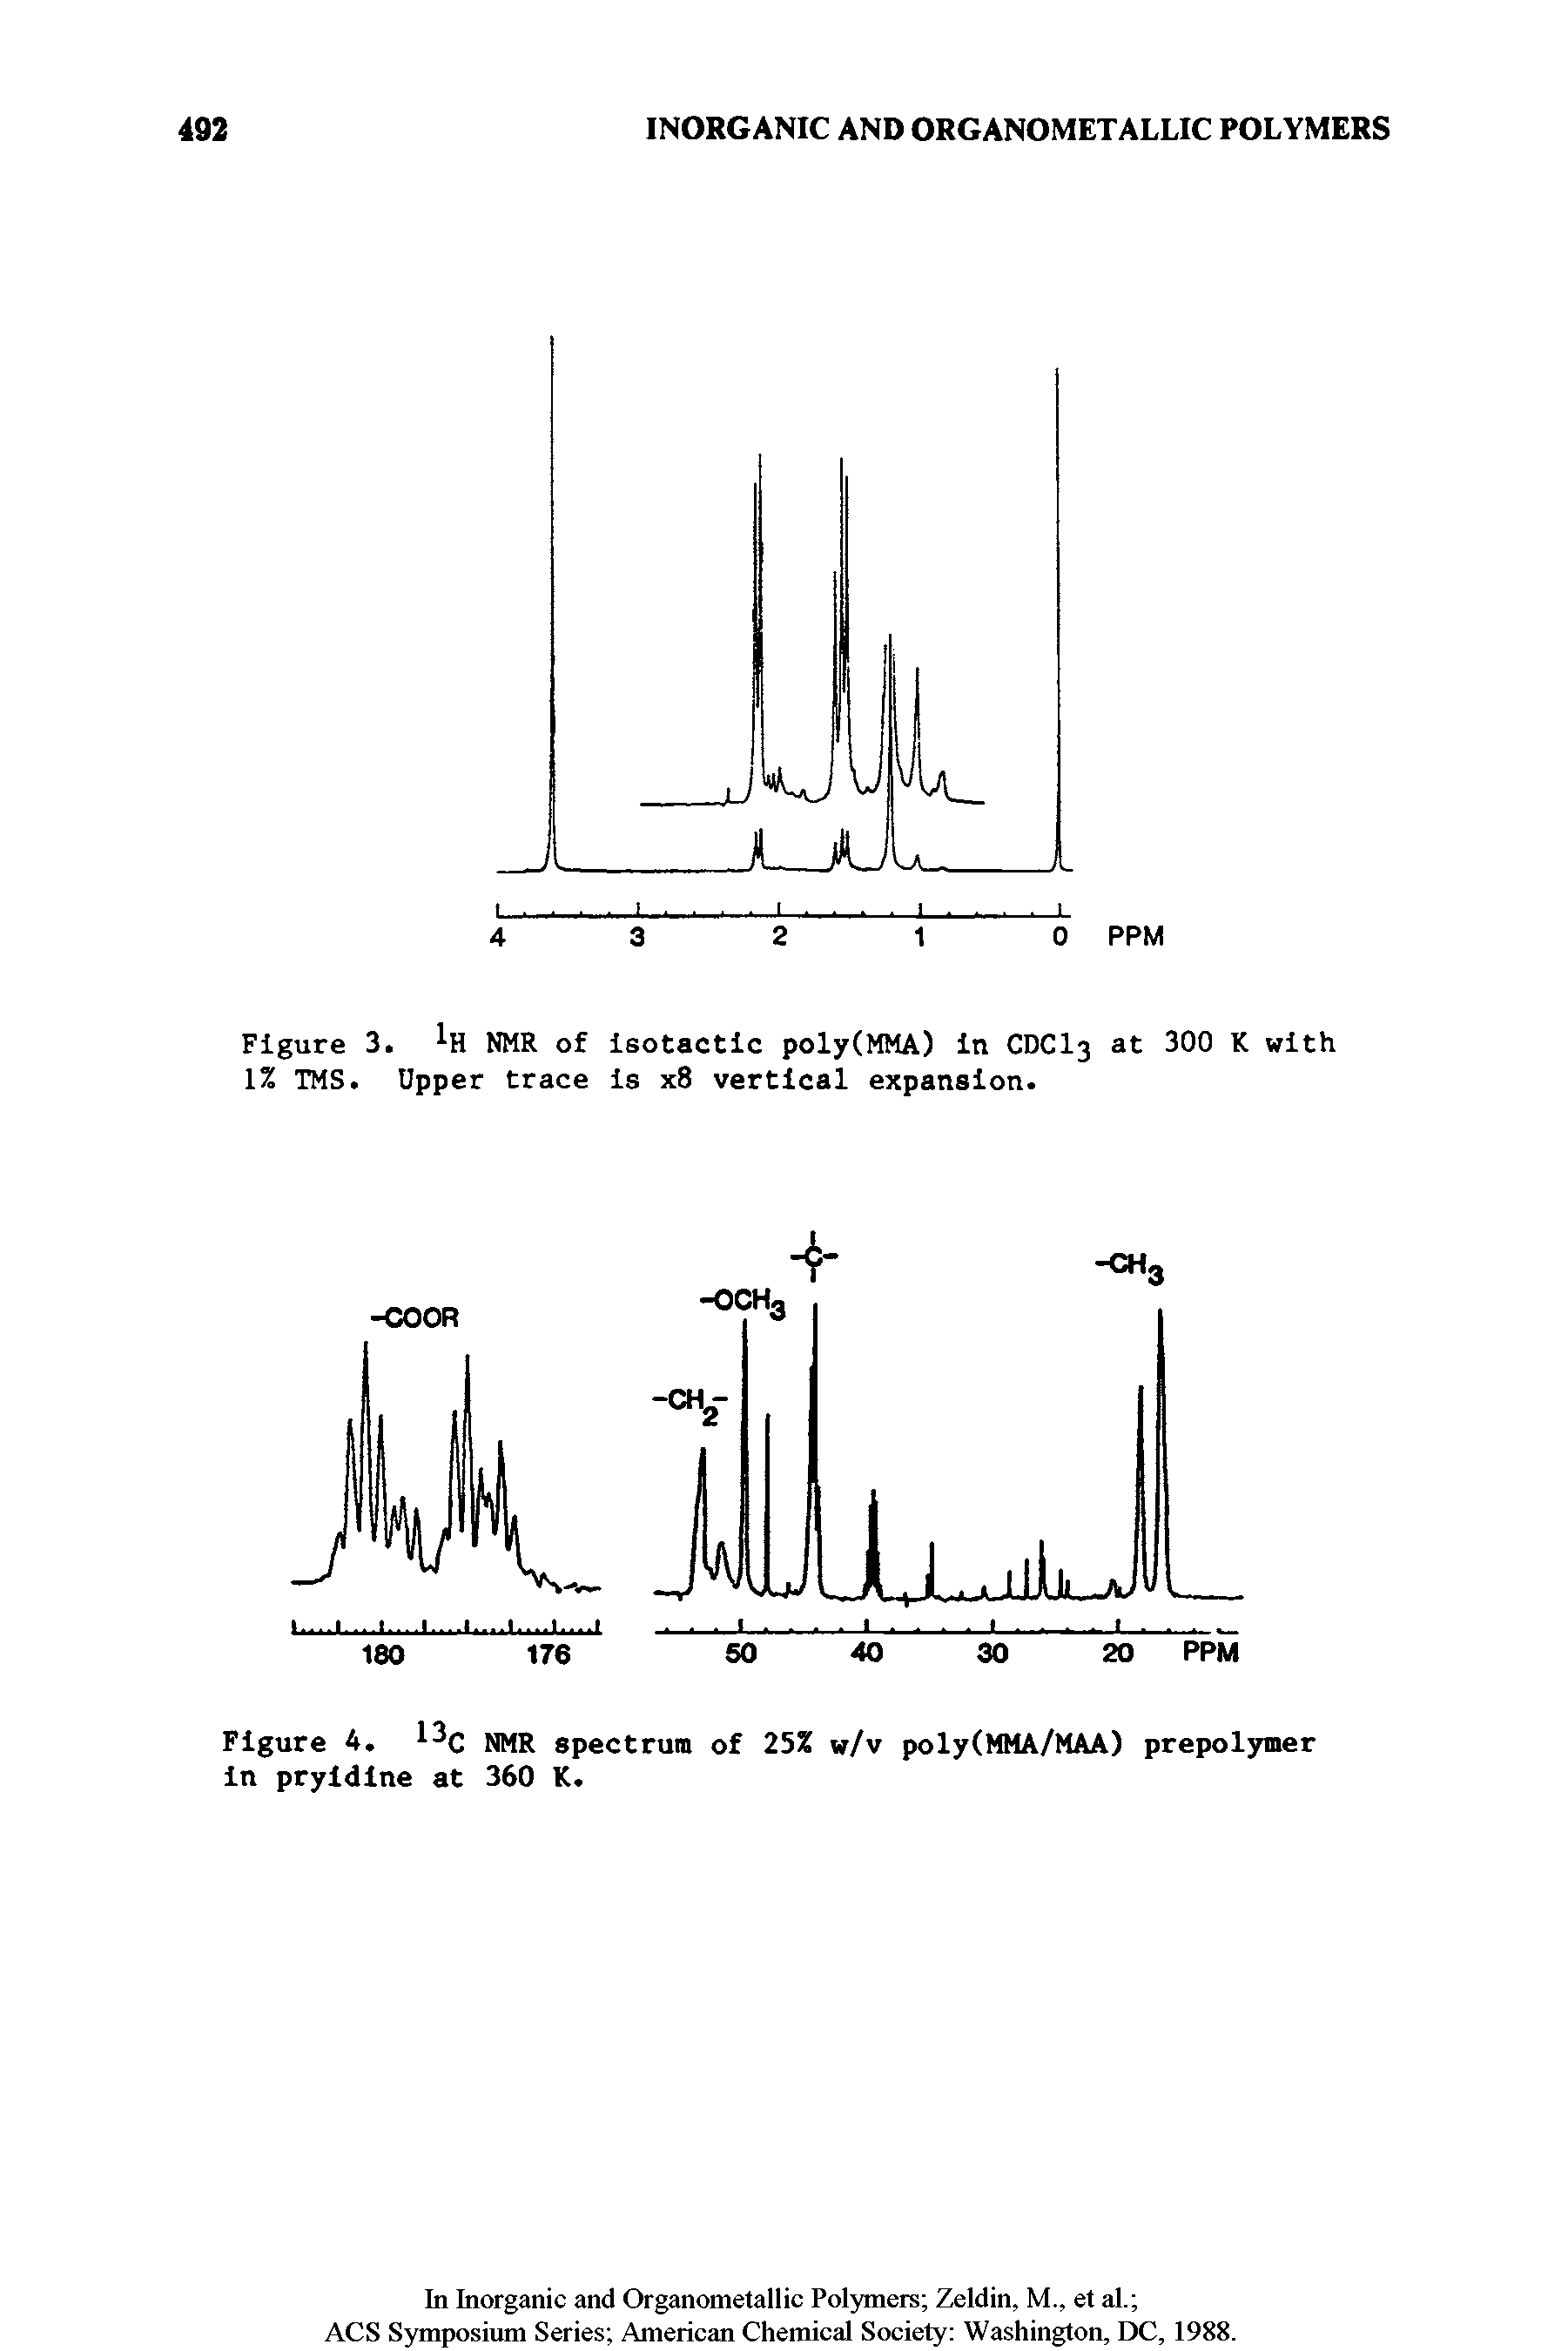 Figure 3. NMR of isotactic poly(MMA) in CDCI3 at 300 K with 1% TMS. Upper trace is x8 vertical expansion.